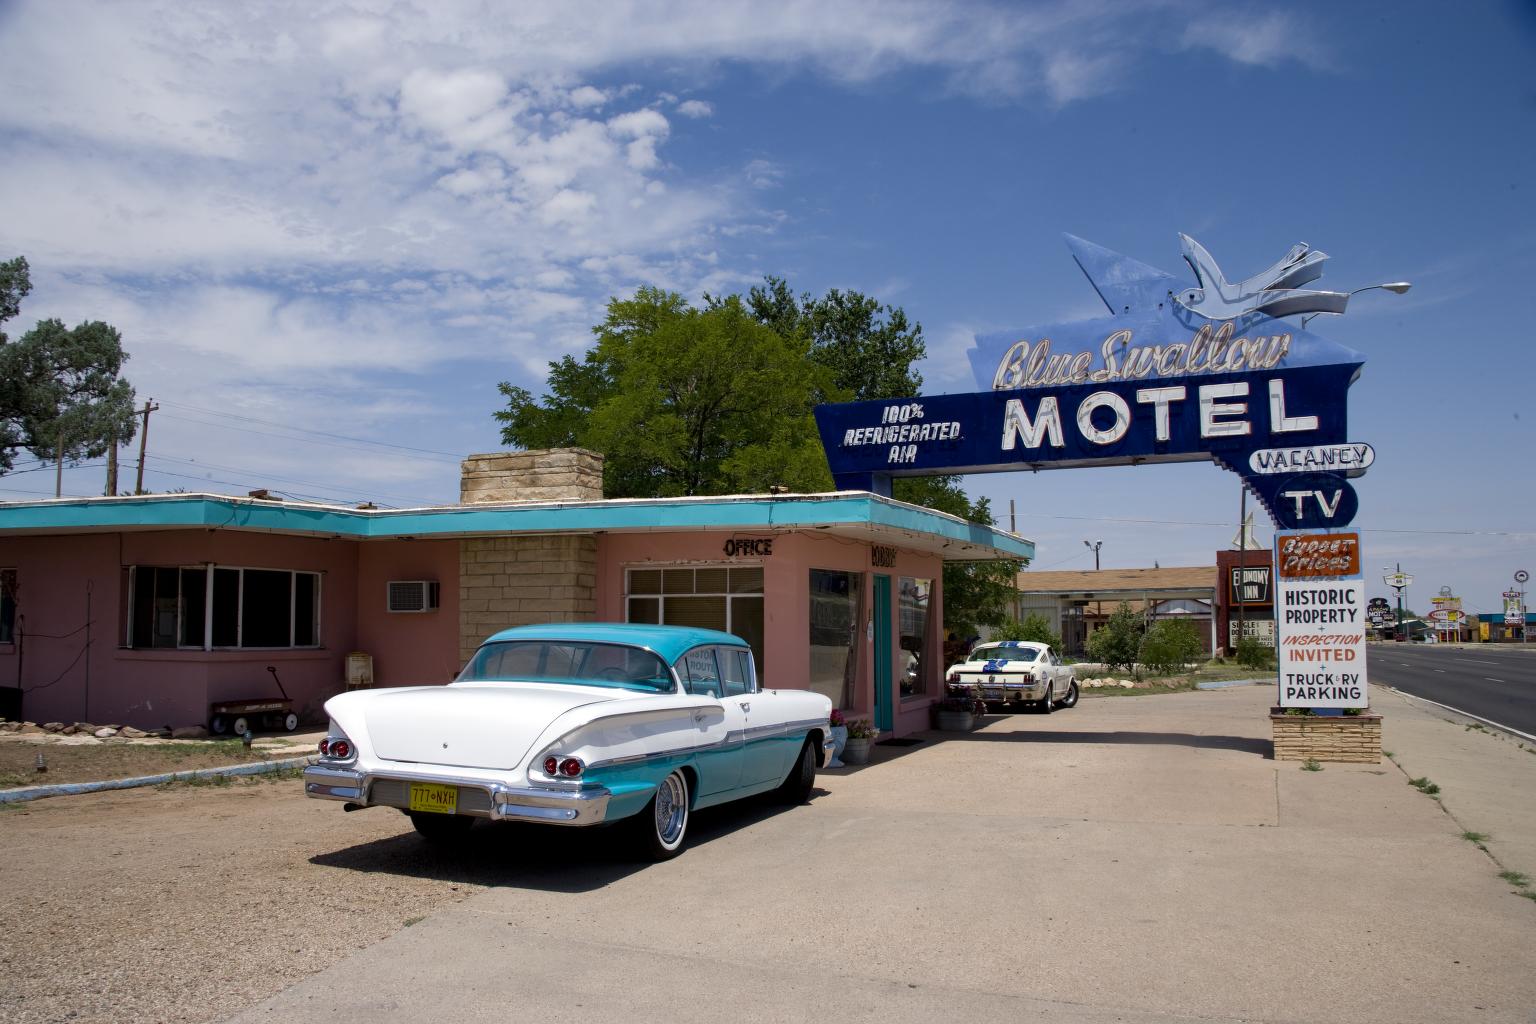 Blue Swallow Motel, Route 66, New Mexico